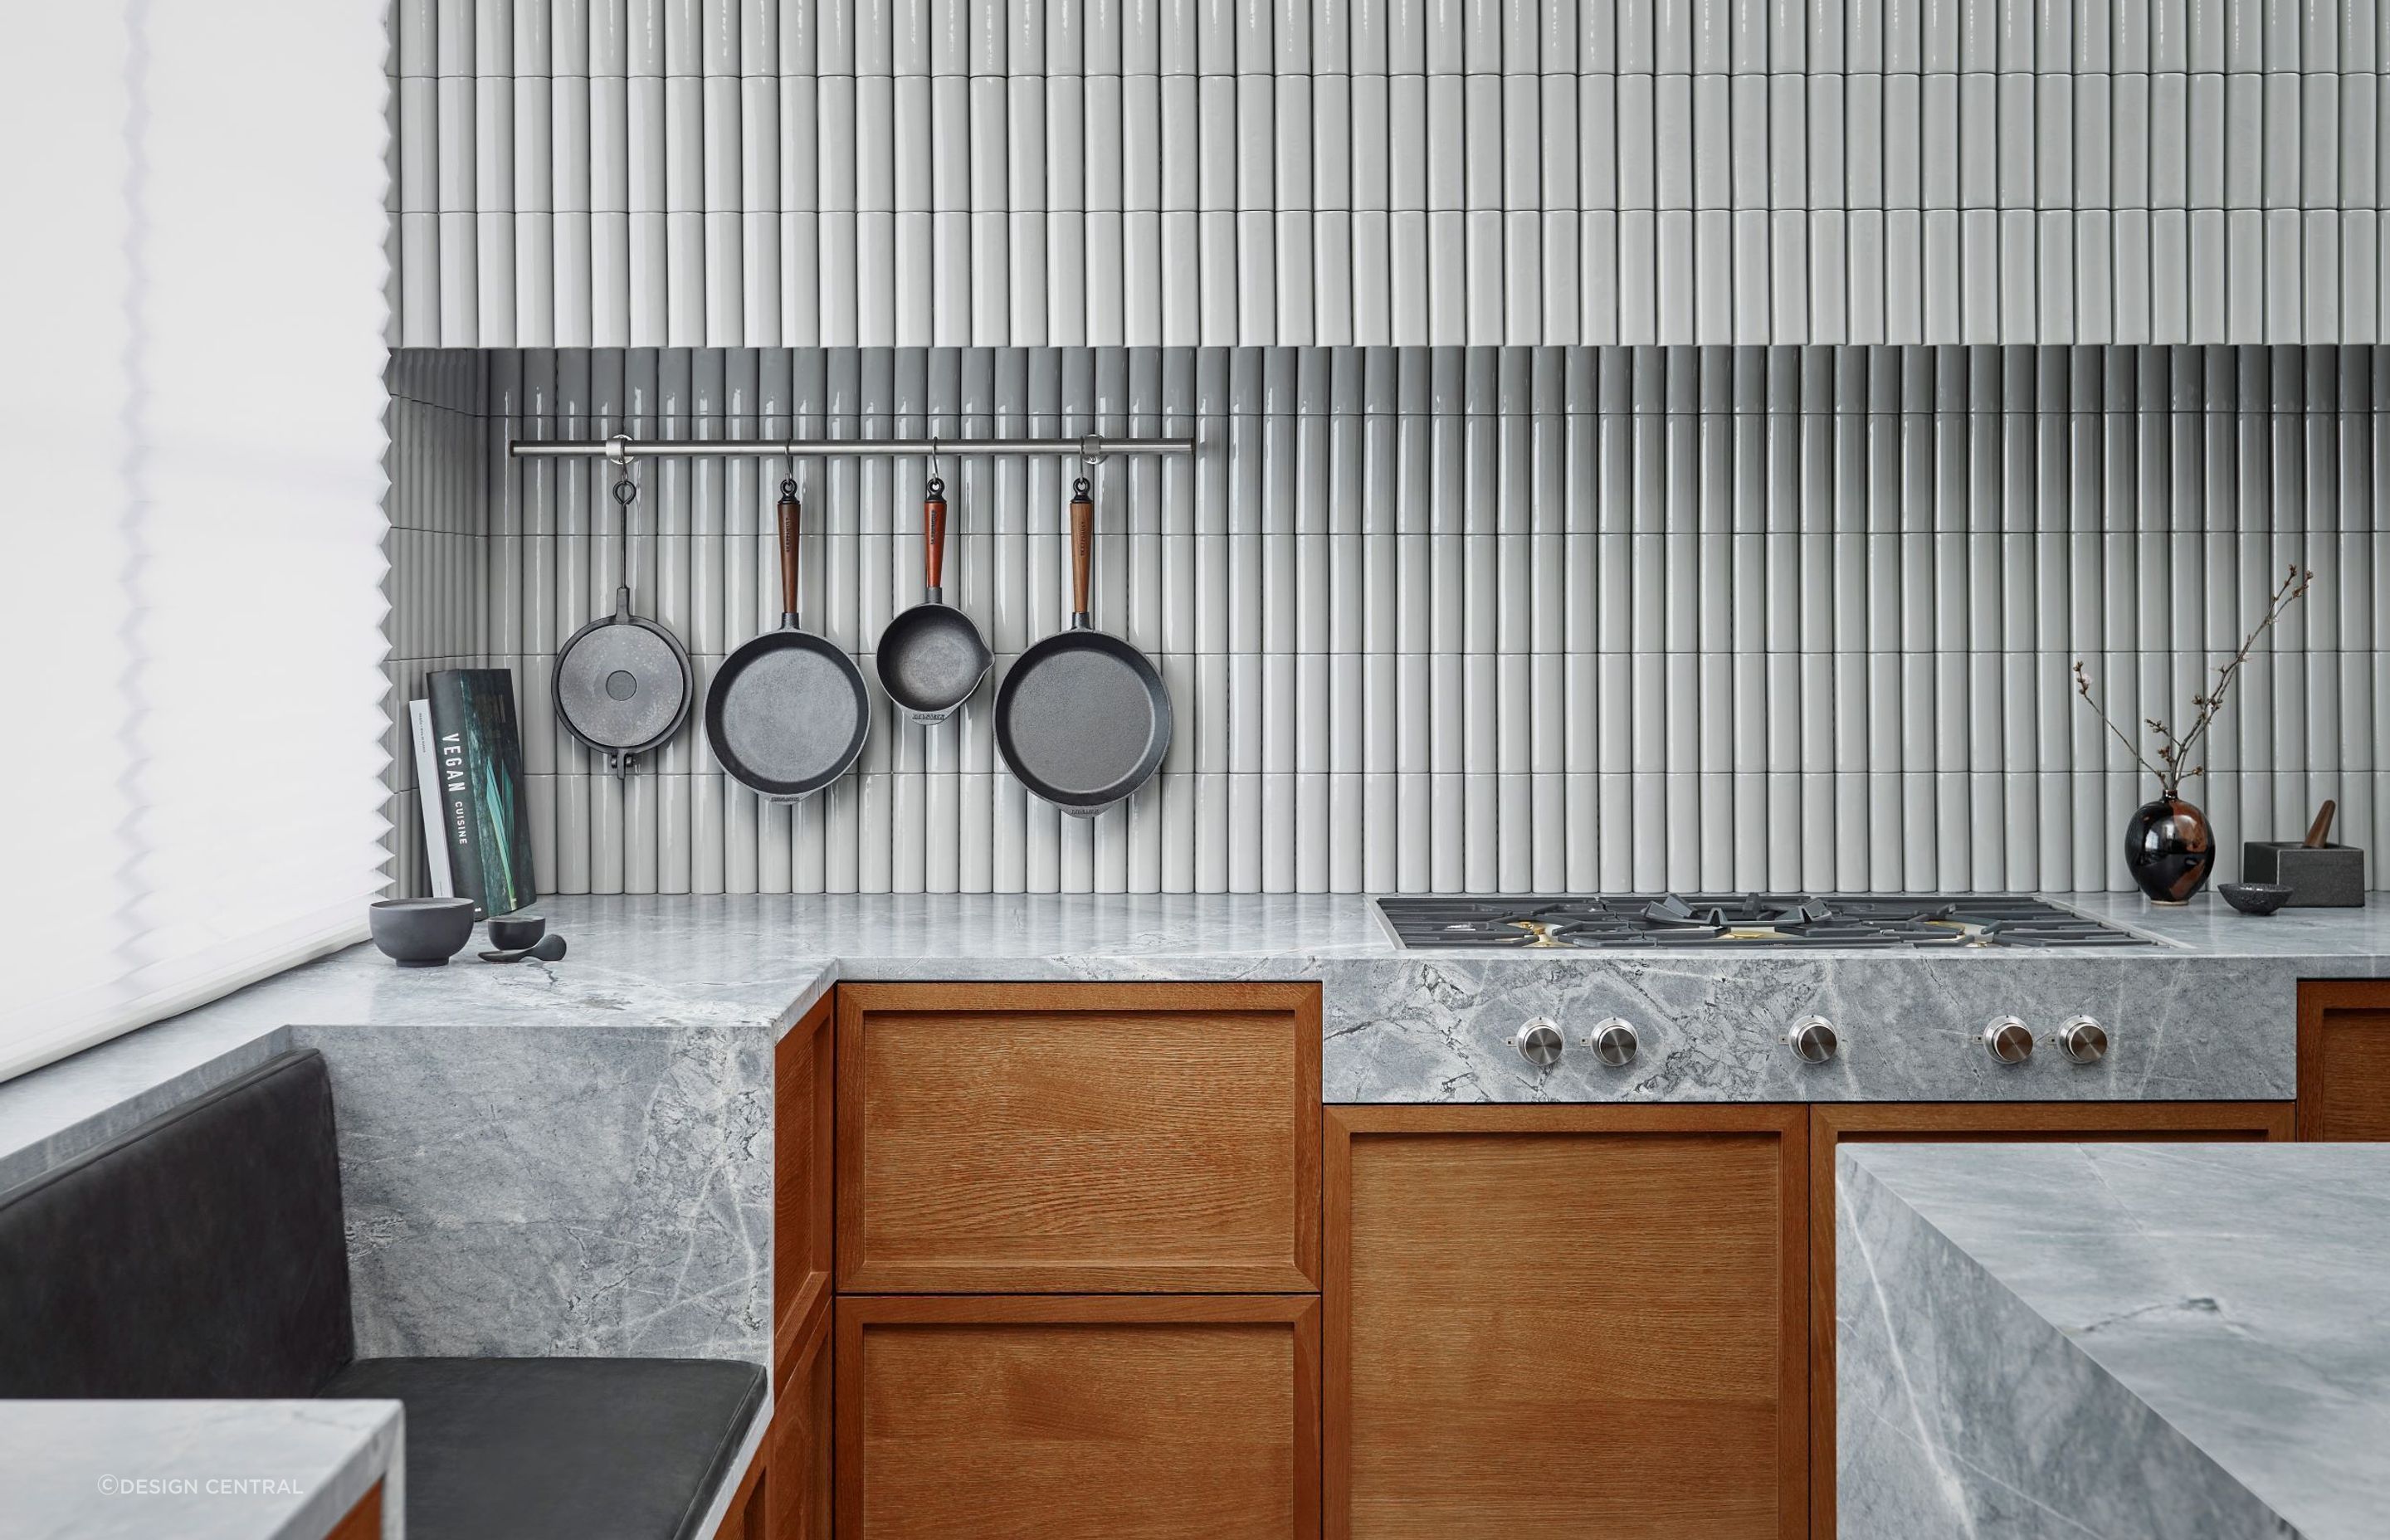 Continuity is key when working in kitchens with multiple walls and surfaces as seen in this beautifully tiled kitchen featuring the Soap Tiles by Sebastian Herkner for Kaufmann Keramik.